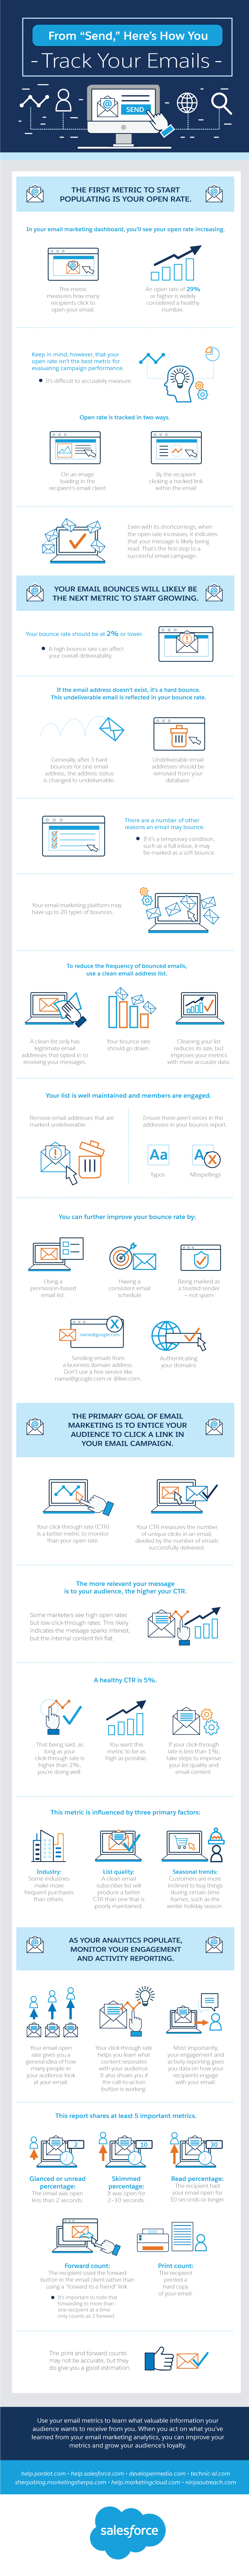 , How to Track Email Marketing Performance [Infographic], TornCRM